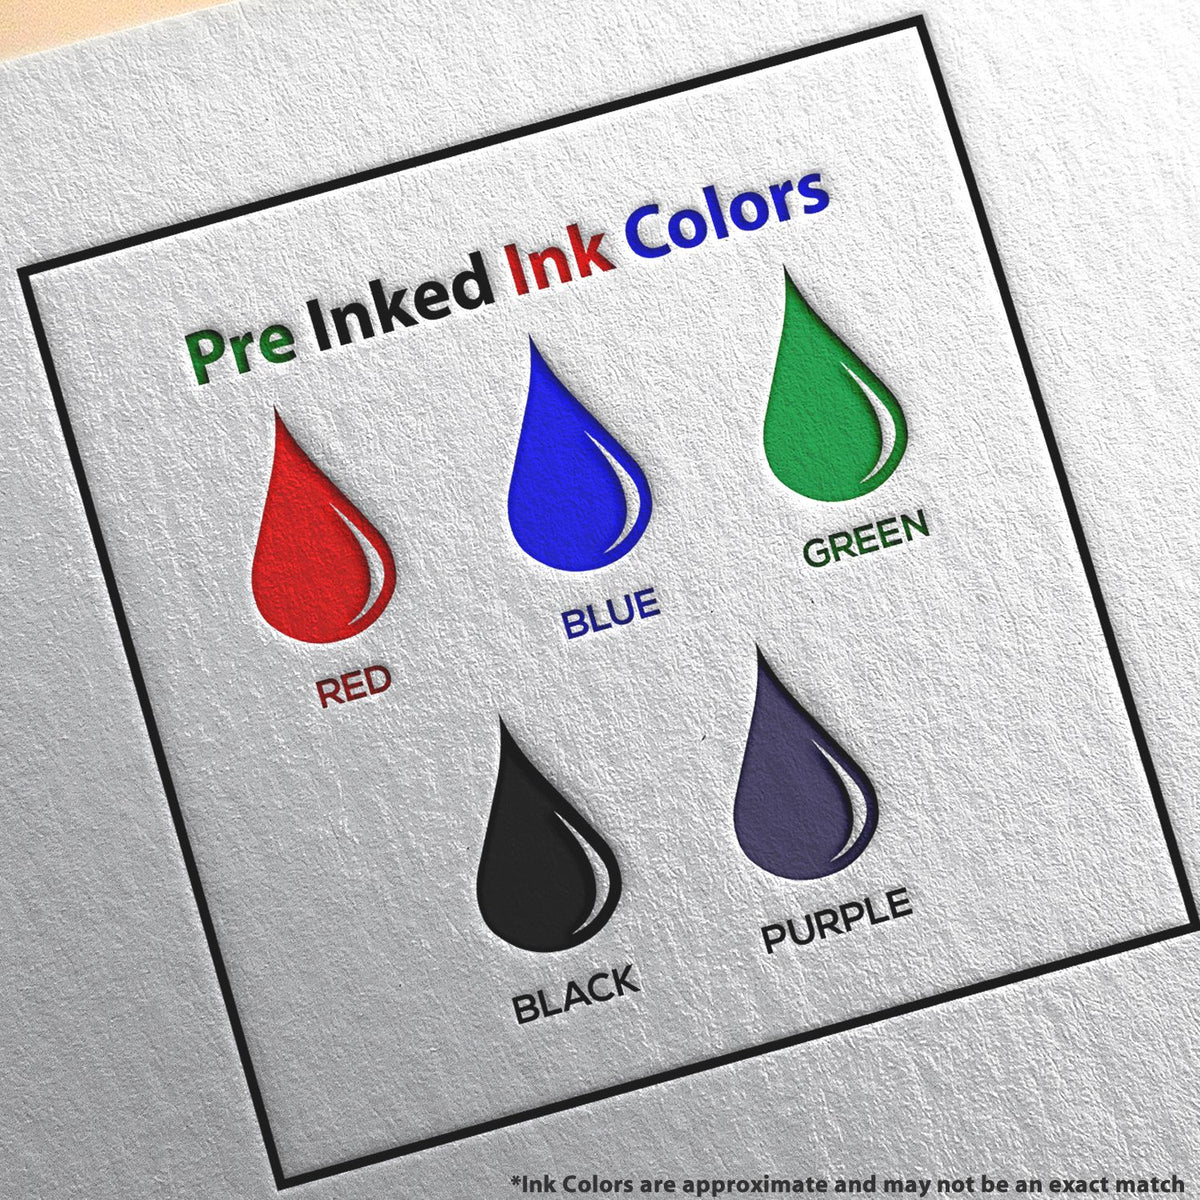 A picture showing the different ink colors or hues available for the Premium MaxLight Pre-Inked District of Columbia Landscape Architectural Stamp product.